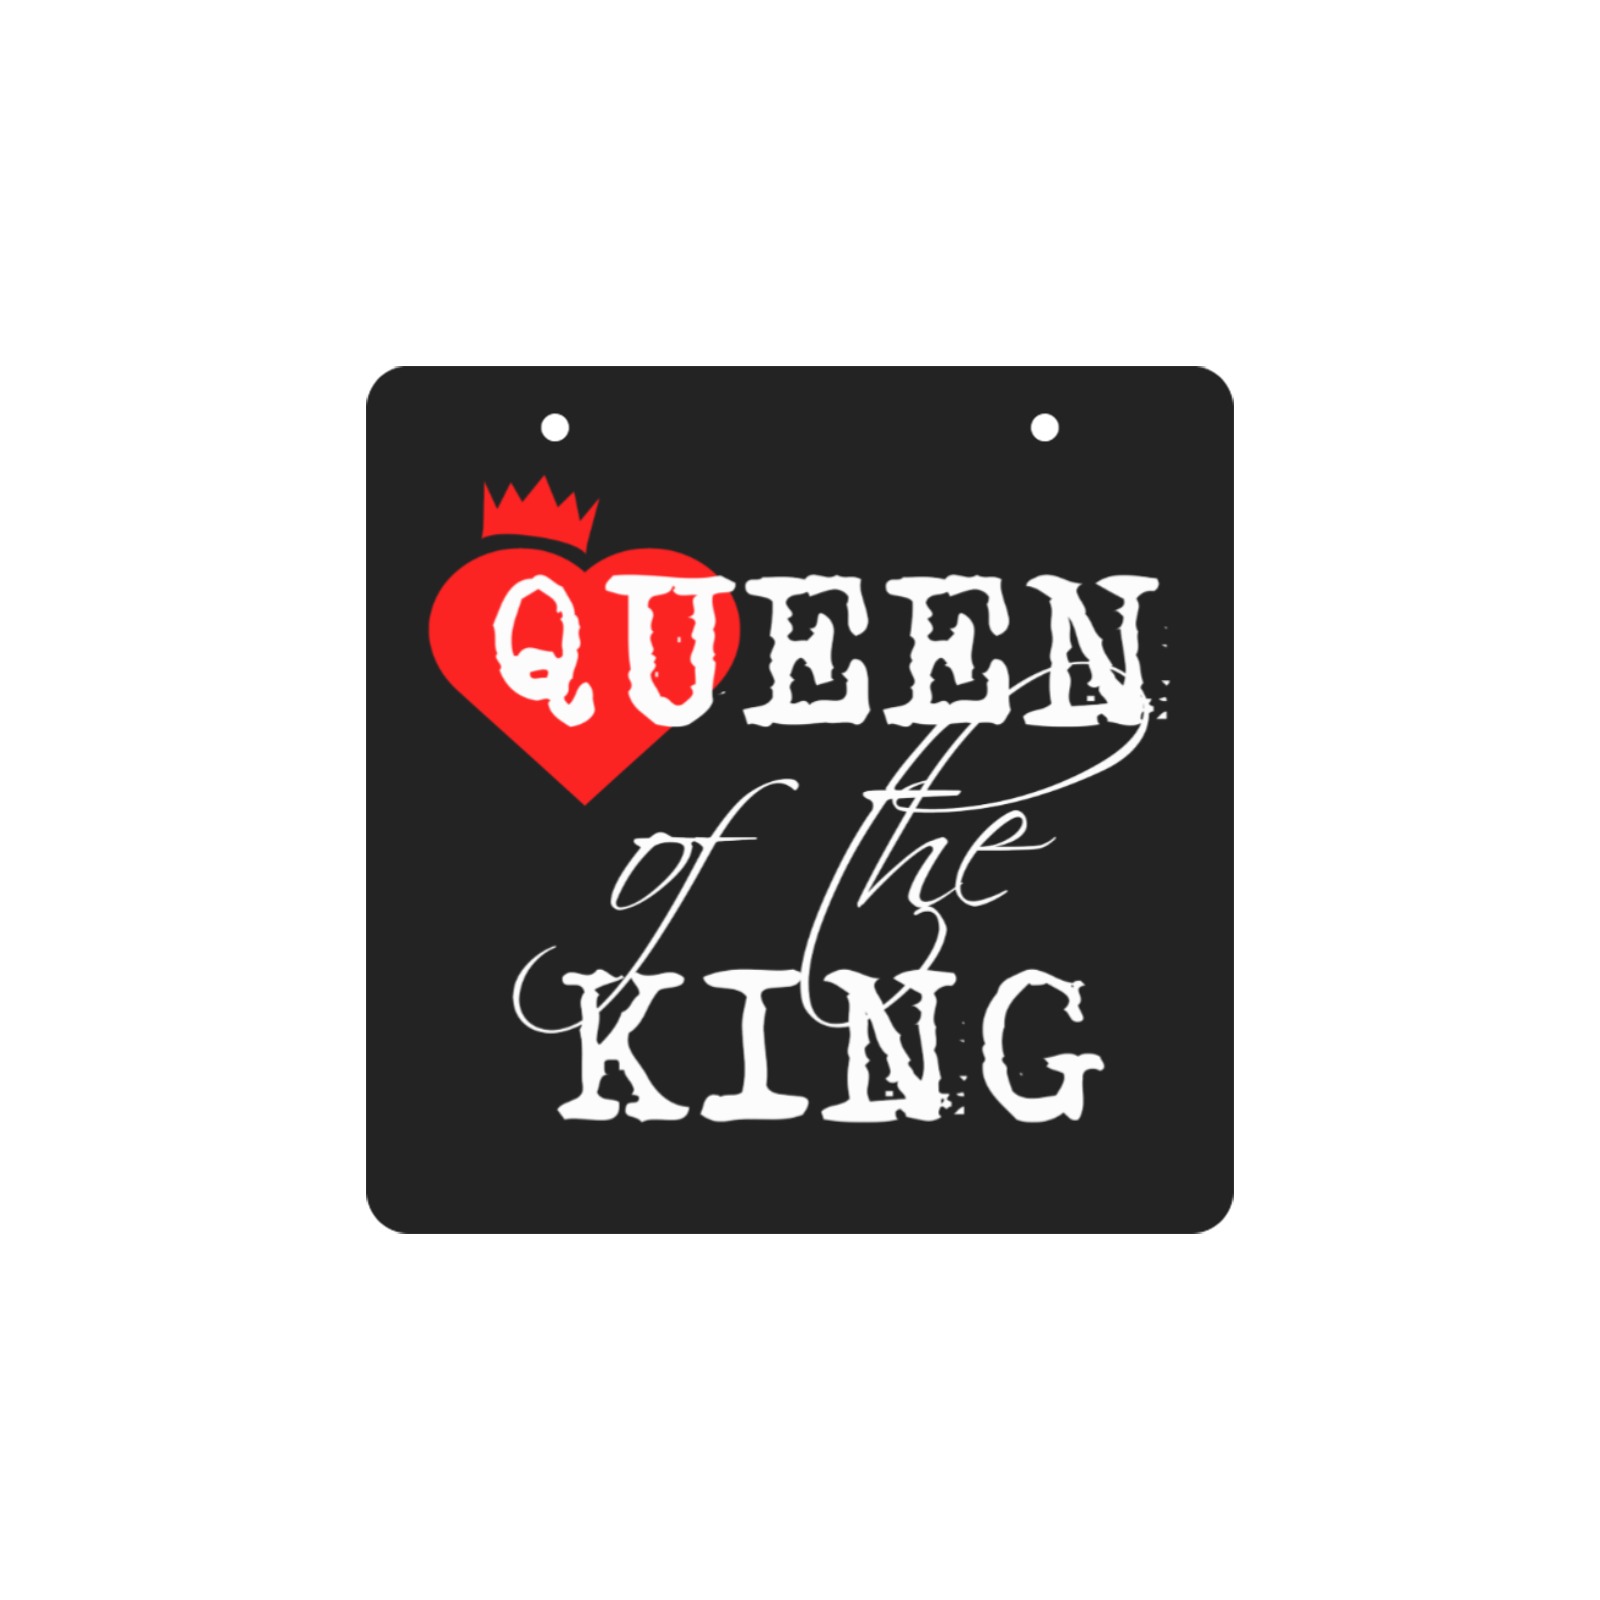 Queen of the king white text and red heart art. Square Wood Door Hanging Sign